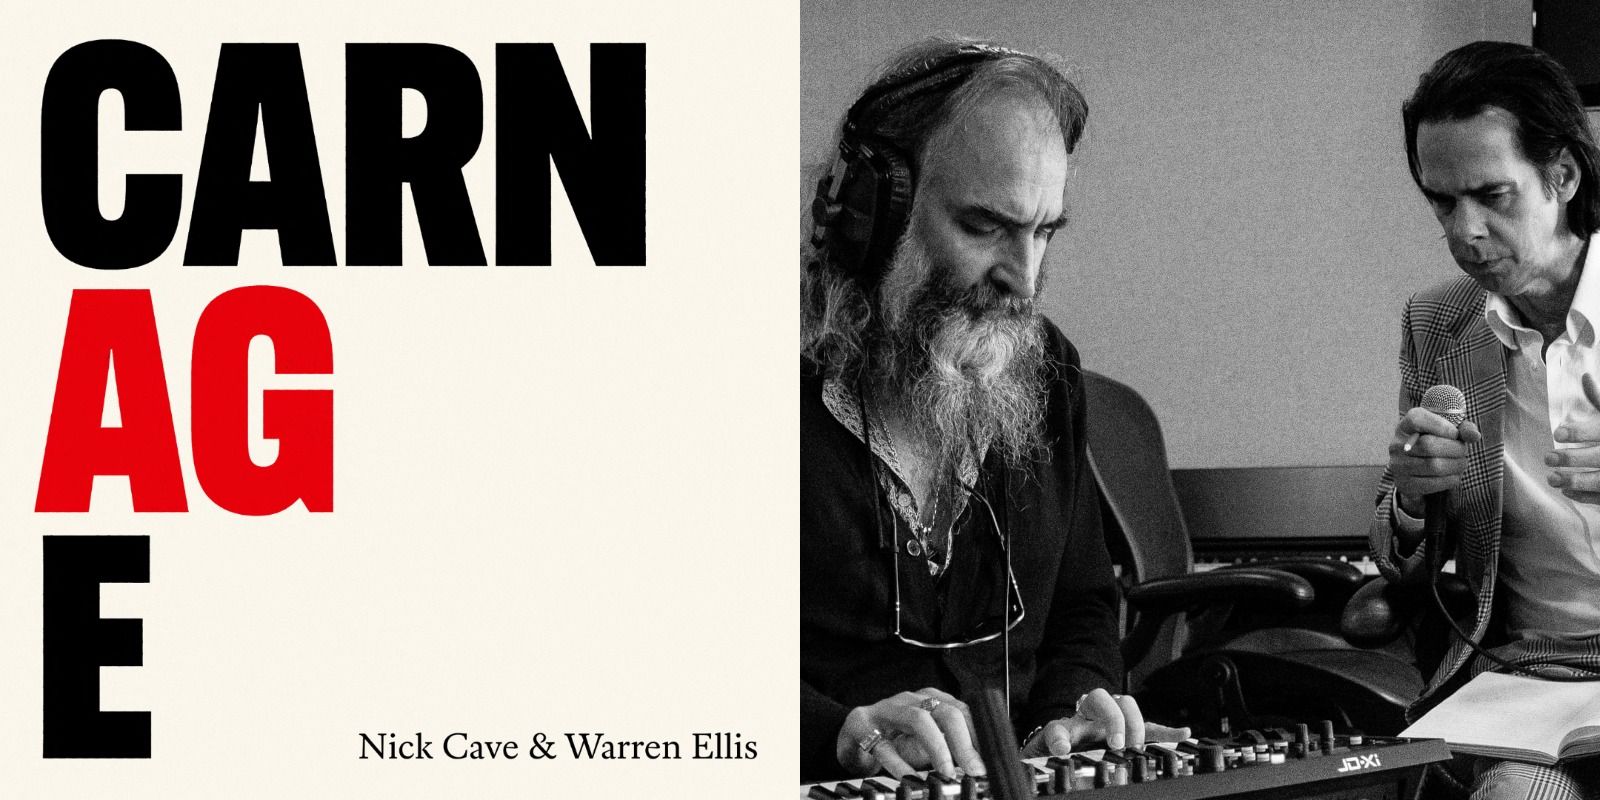 Split image of the album cover of Carnage and Nick Cave and Warren Ellis